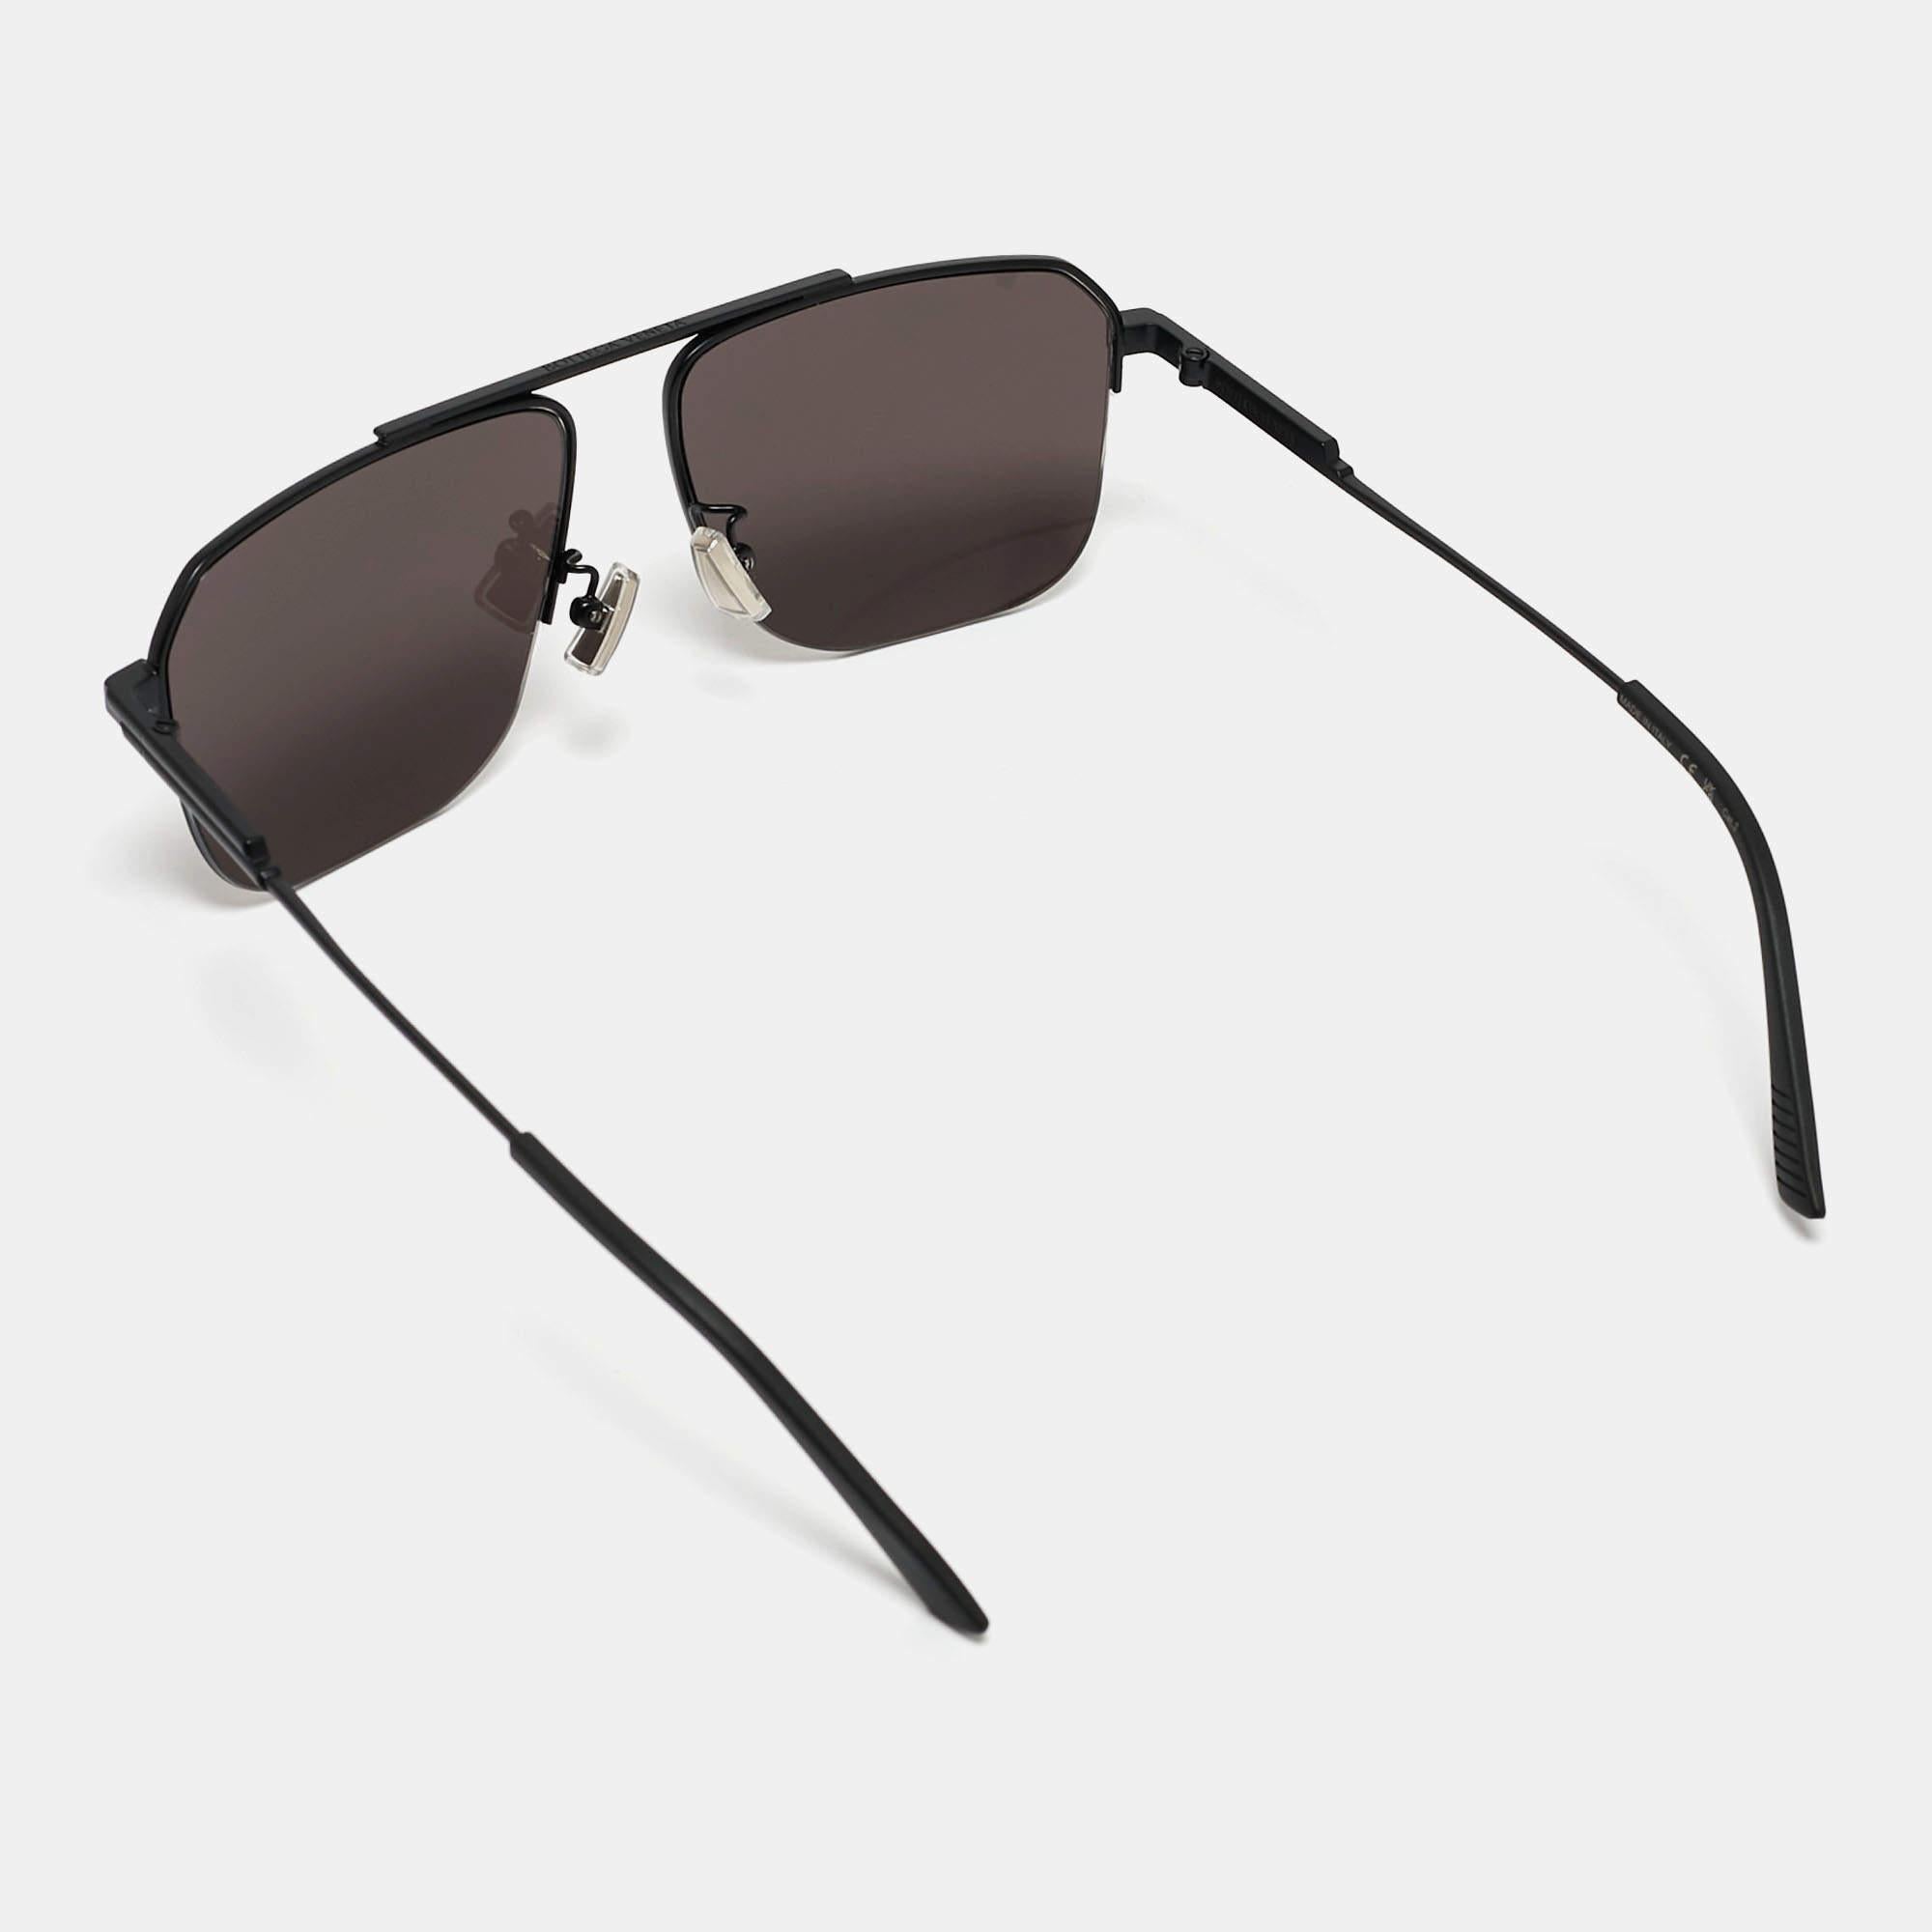 Embrace sunny days in full style with the help of this pair of Bottega Veneta sunglasses. Created with expertise, the luxe sunglasses feature a well-designed frame and high-grade lenses that are equipped to protect your eyes.

Eye Size: 58 mm
Temple